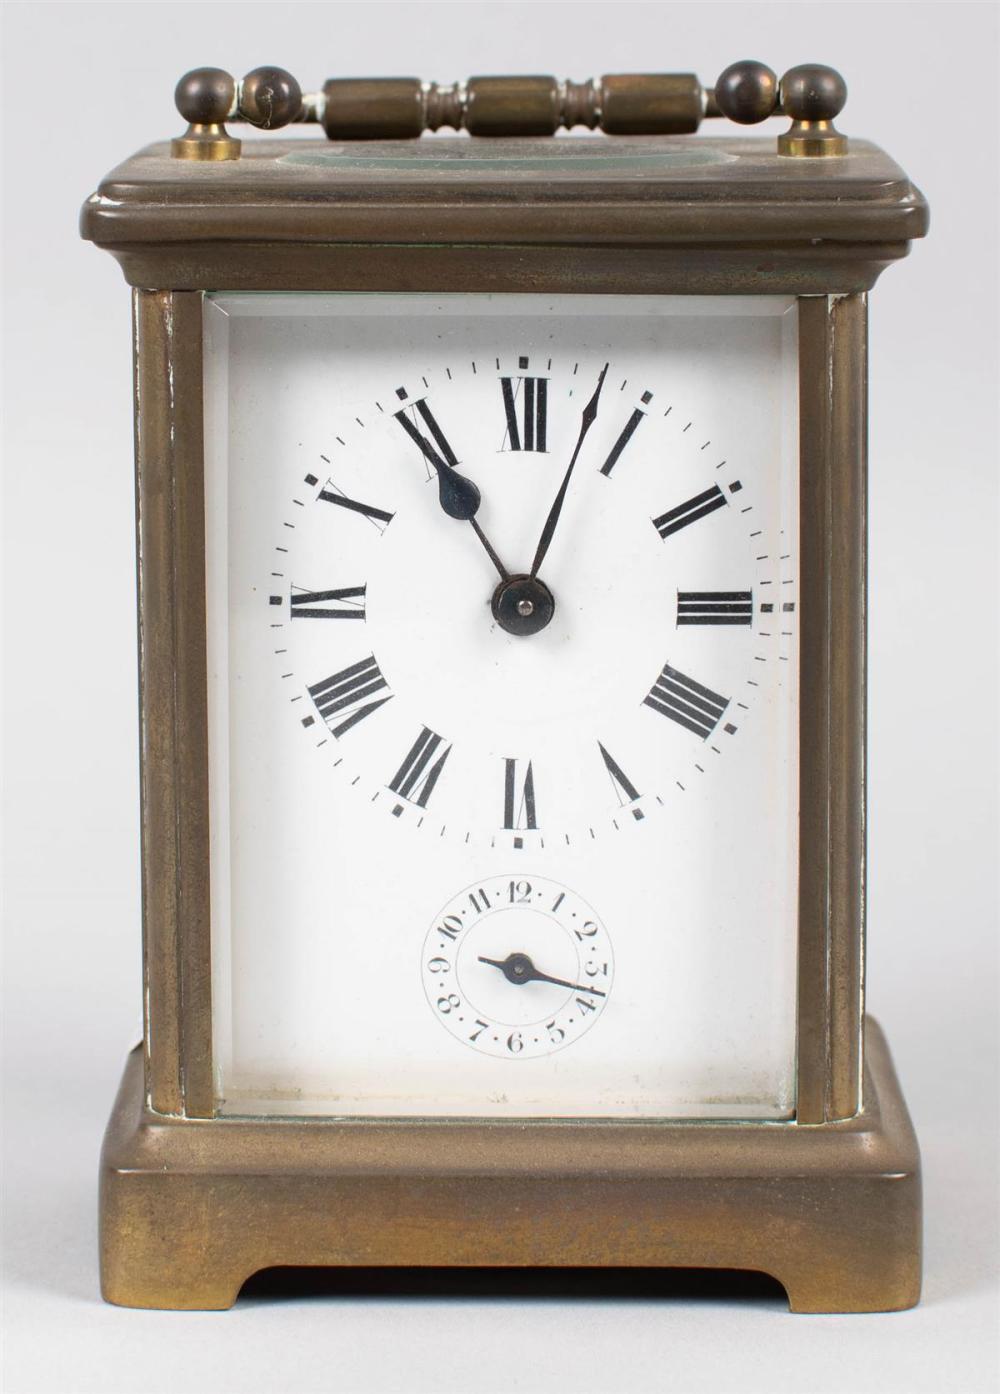 CARRIAGE CLOCK WITH ALARMCARRIAGE CLOCK